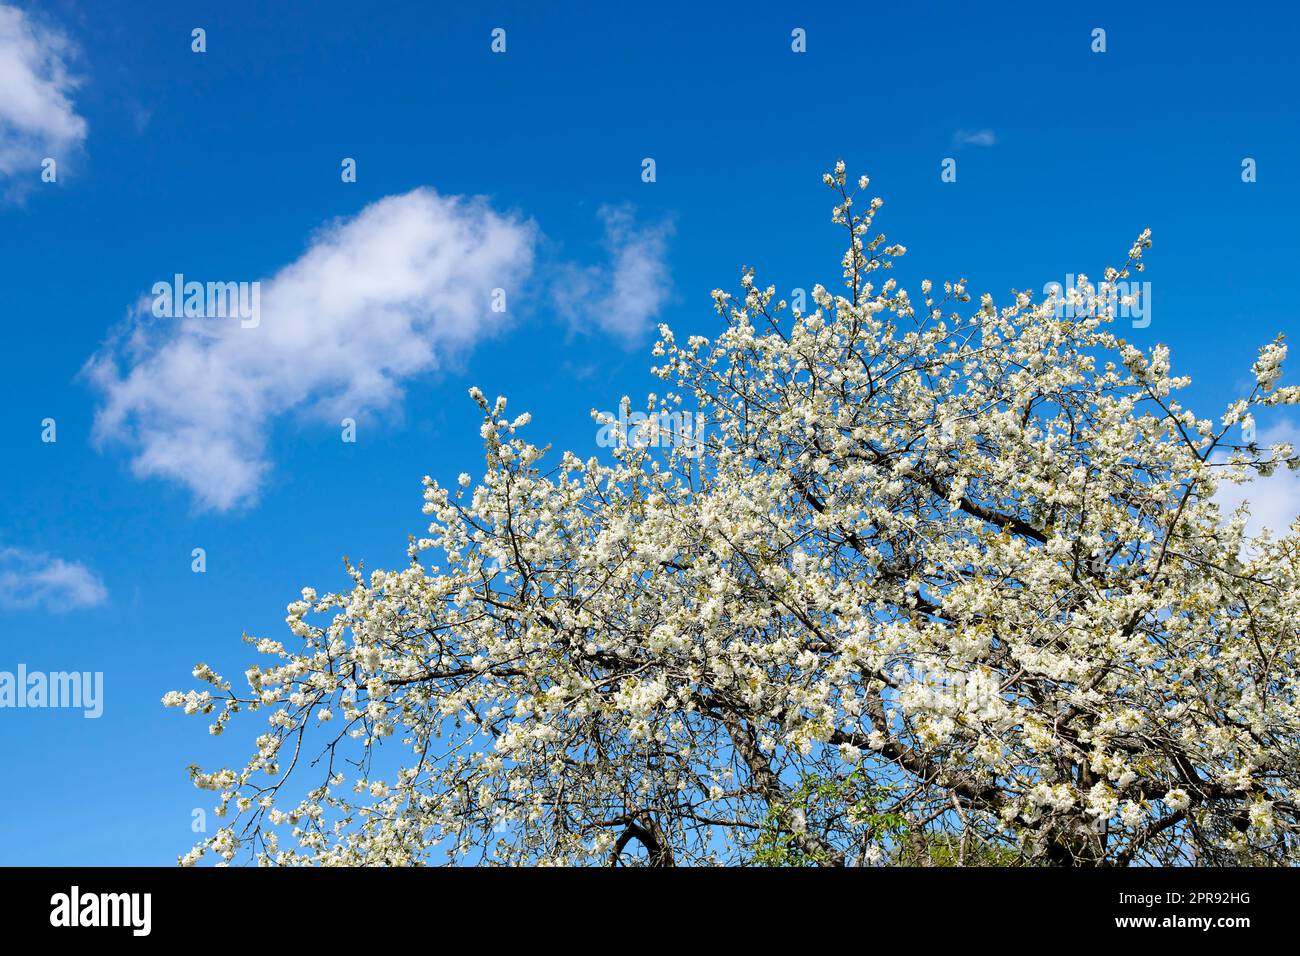 Cherry flowers on a tree against a cloudy blue sky in a backyard garden in summer. Wild white sakura flowering plants blossoming and flourishing on branches in a nature park or field in spring Stock Photo